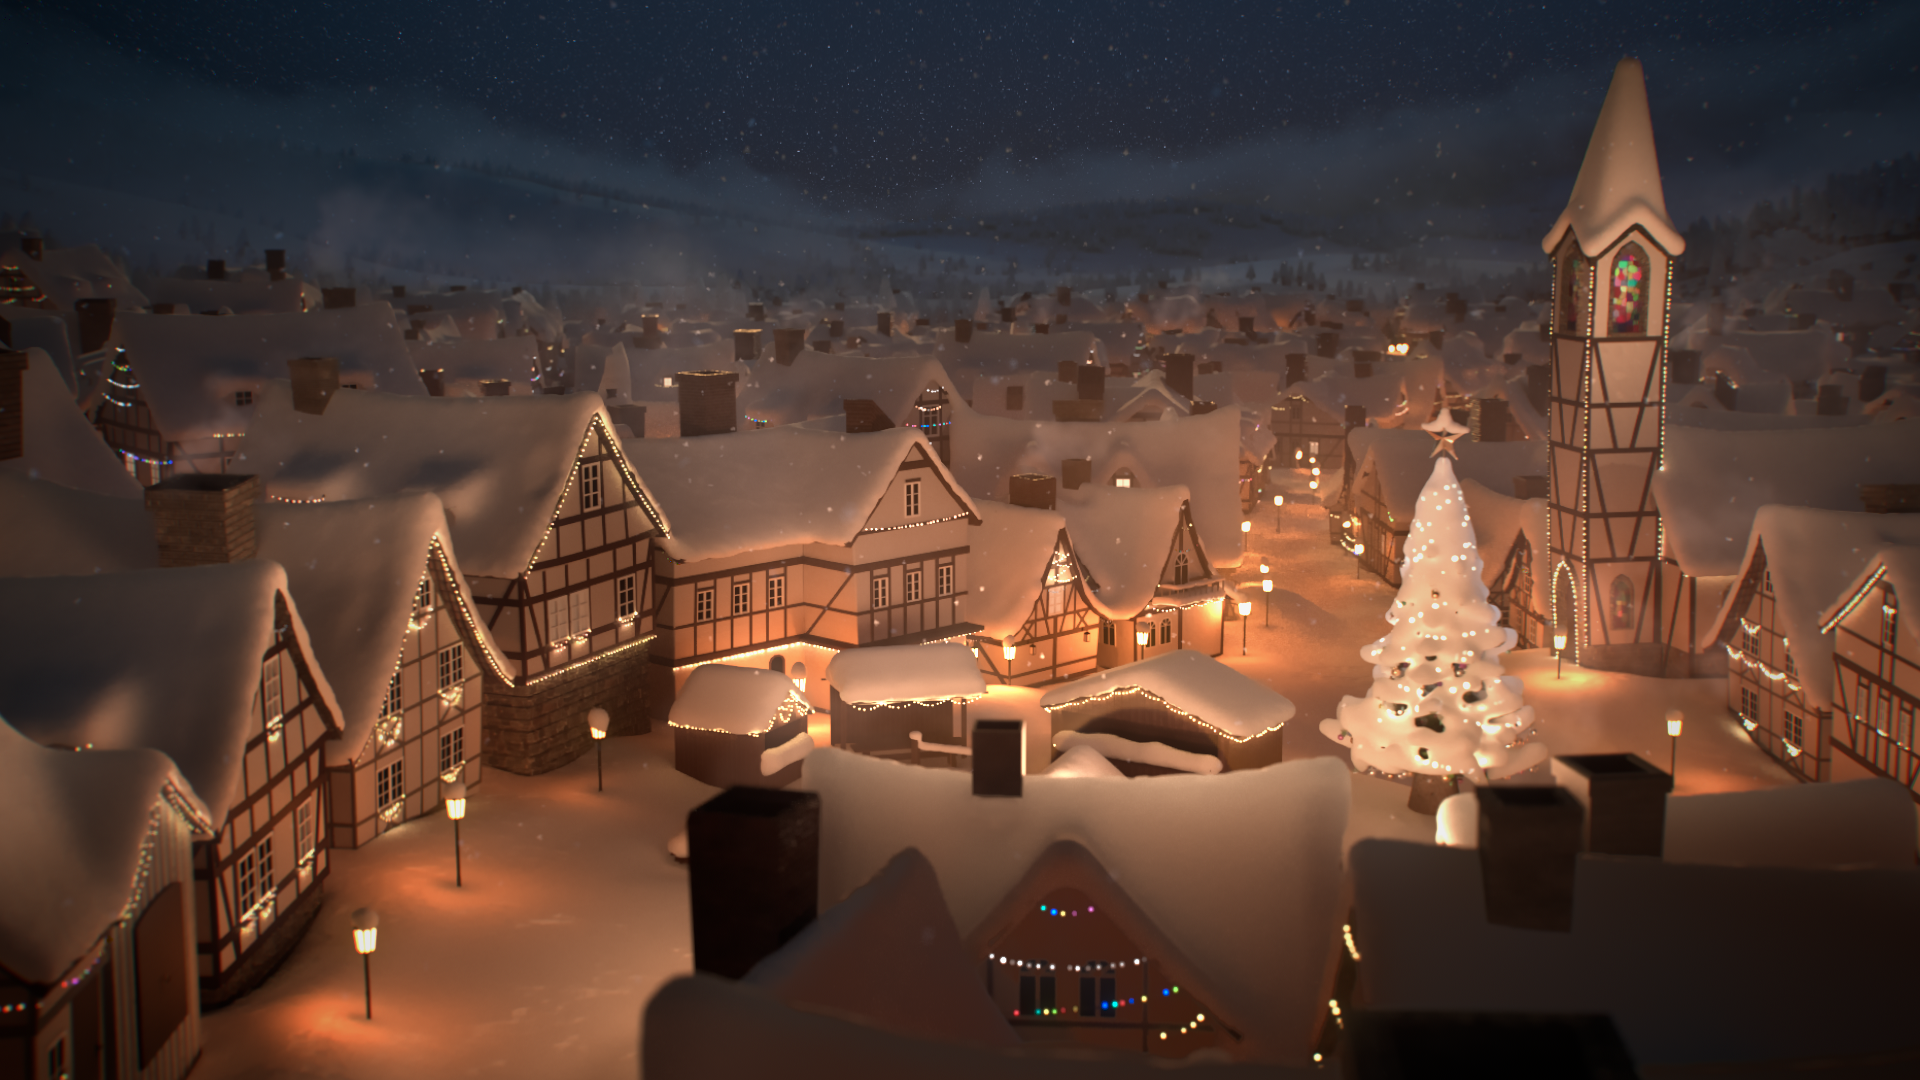 Idyllic winter village in the snow decorated with fairy lights and a Christmas tree